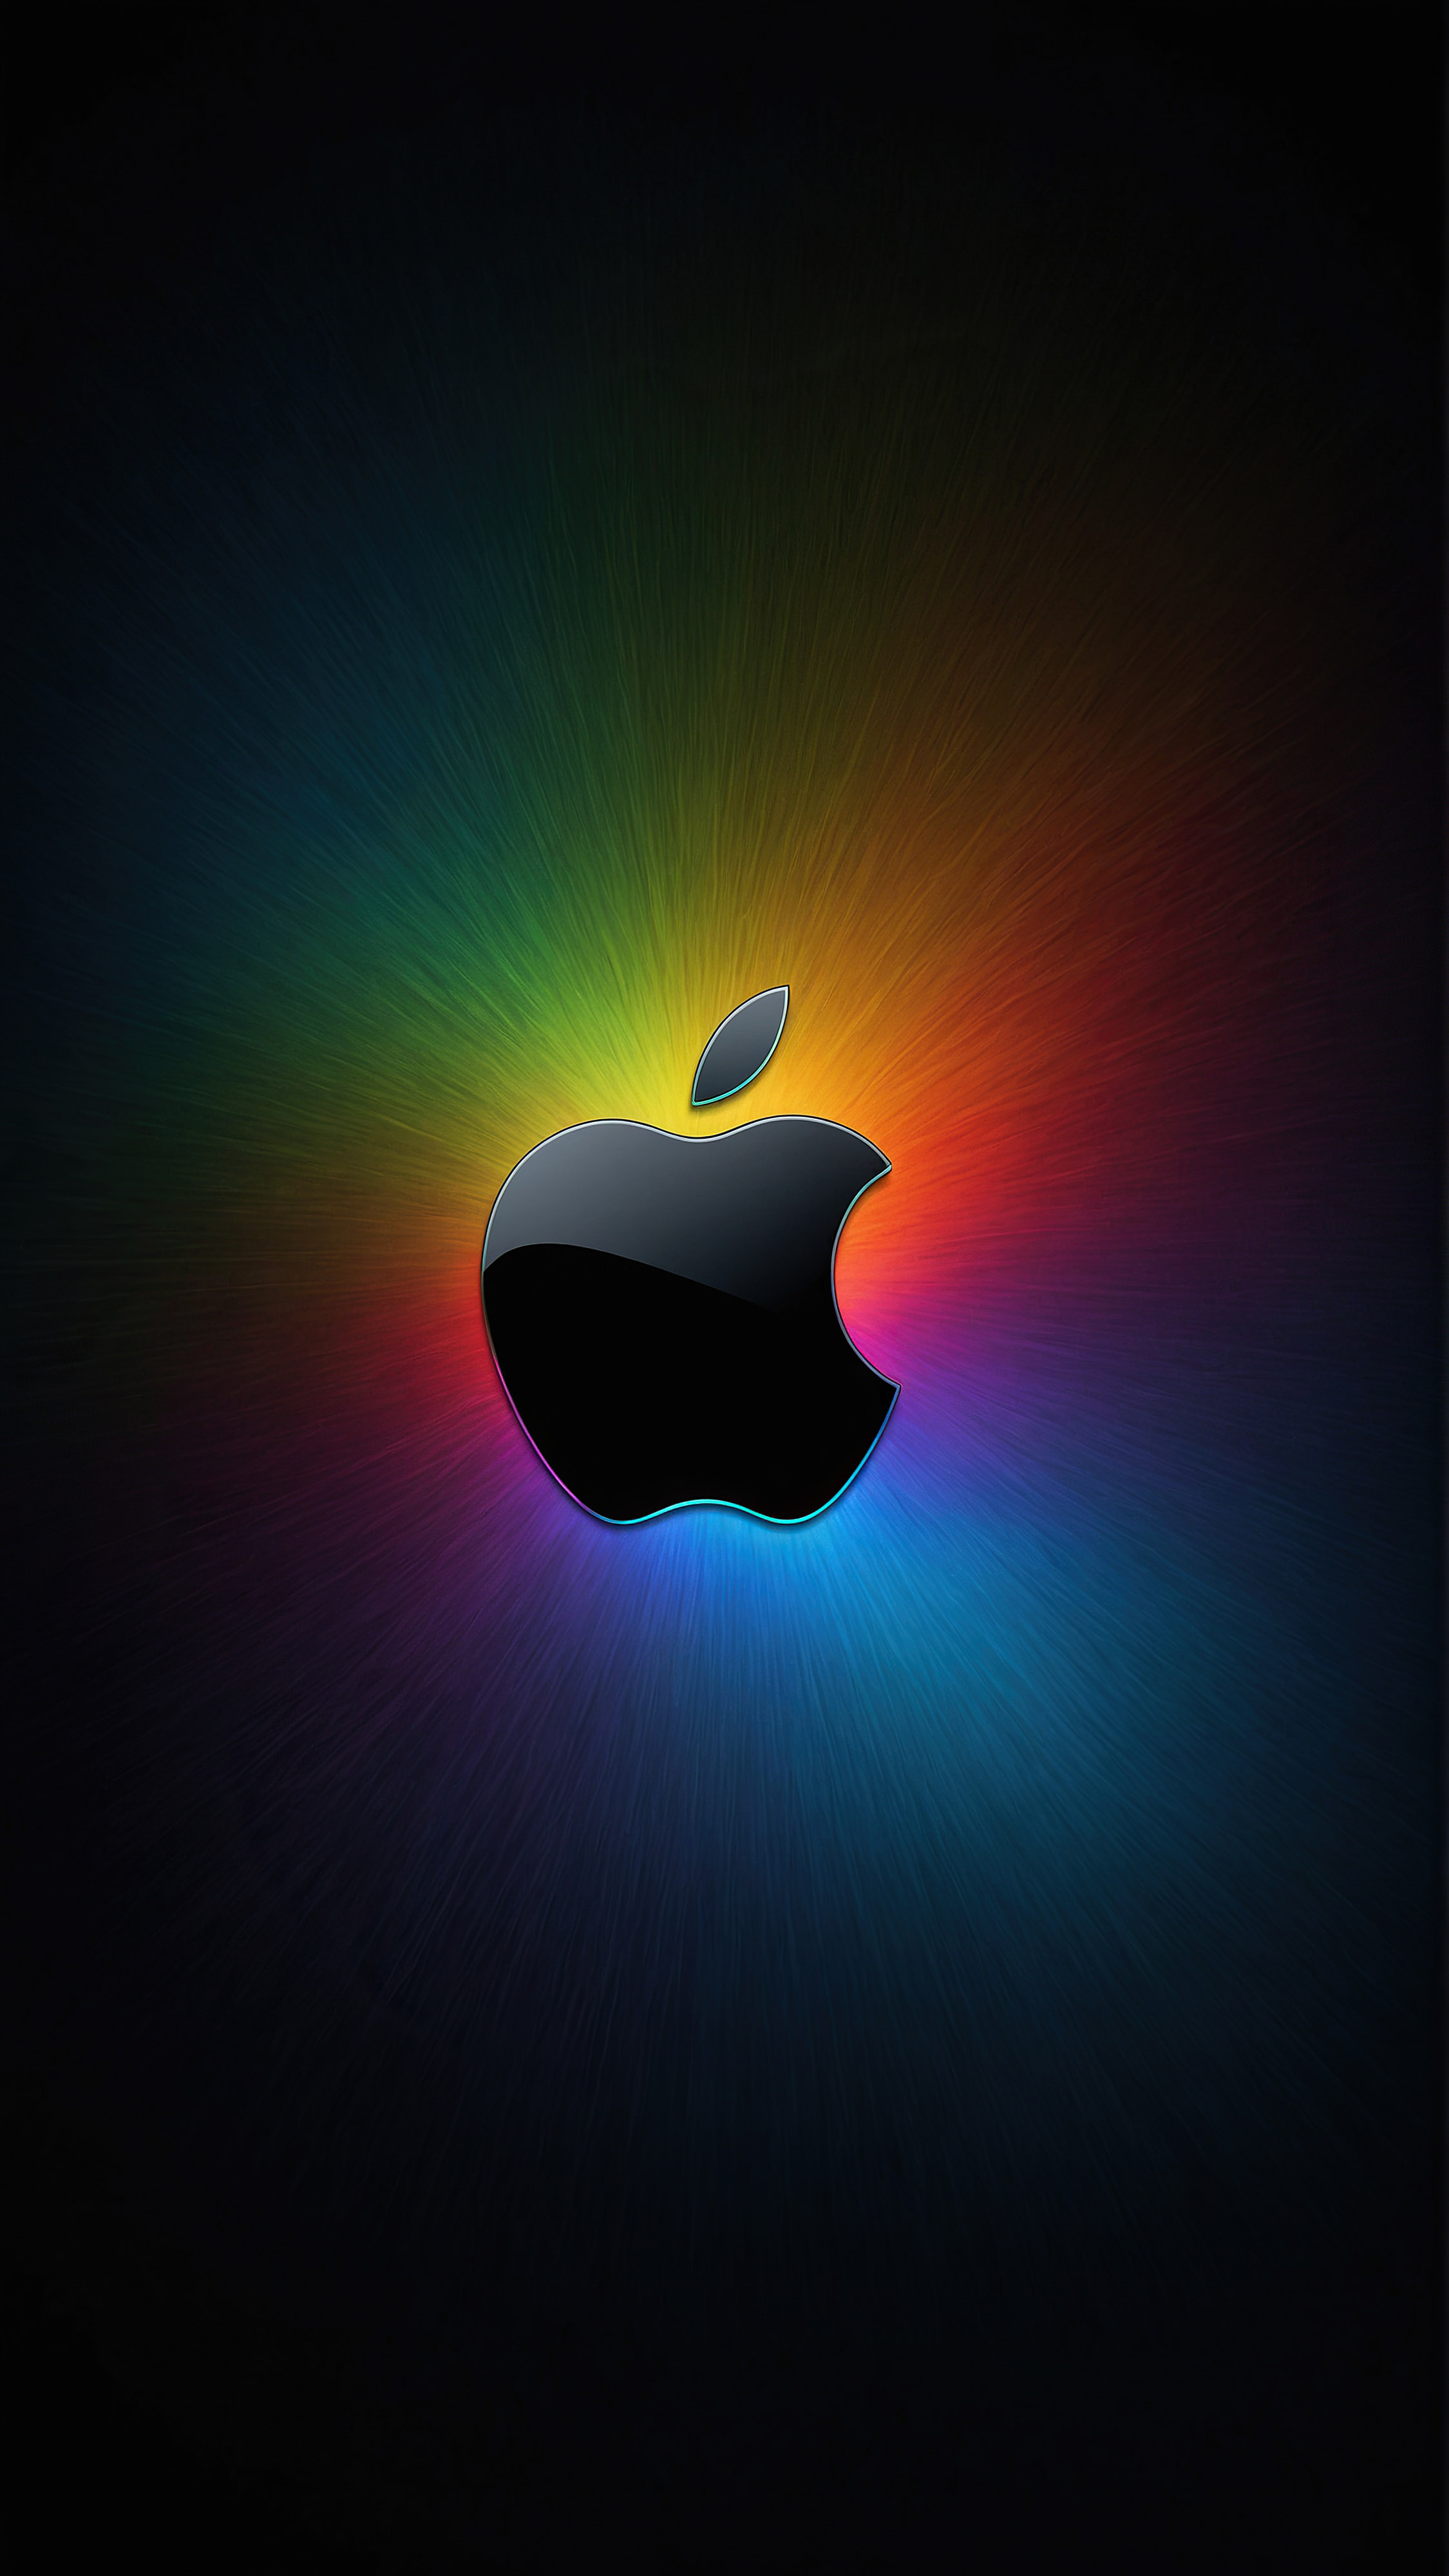 Transform your device’s home screen with our iPhone wallpaper in  4K, showcasing the iconic Apple logo in a metallic and glossy look, standing illuminated and three-dimensional against a dark backdrop.